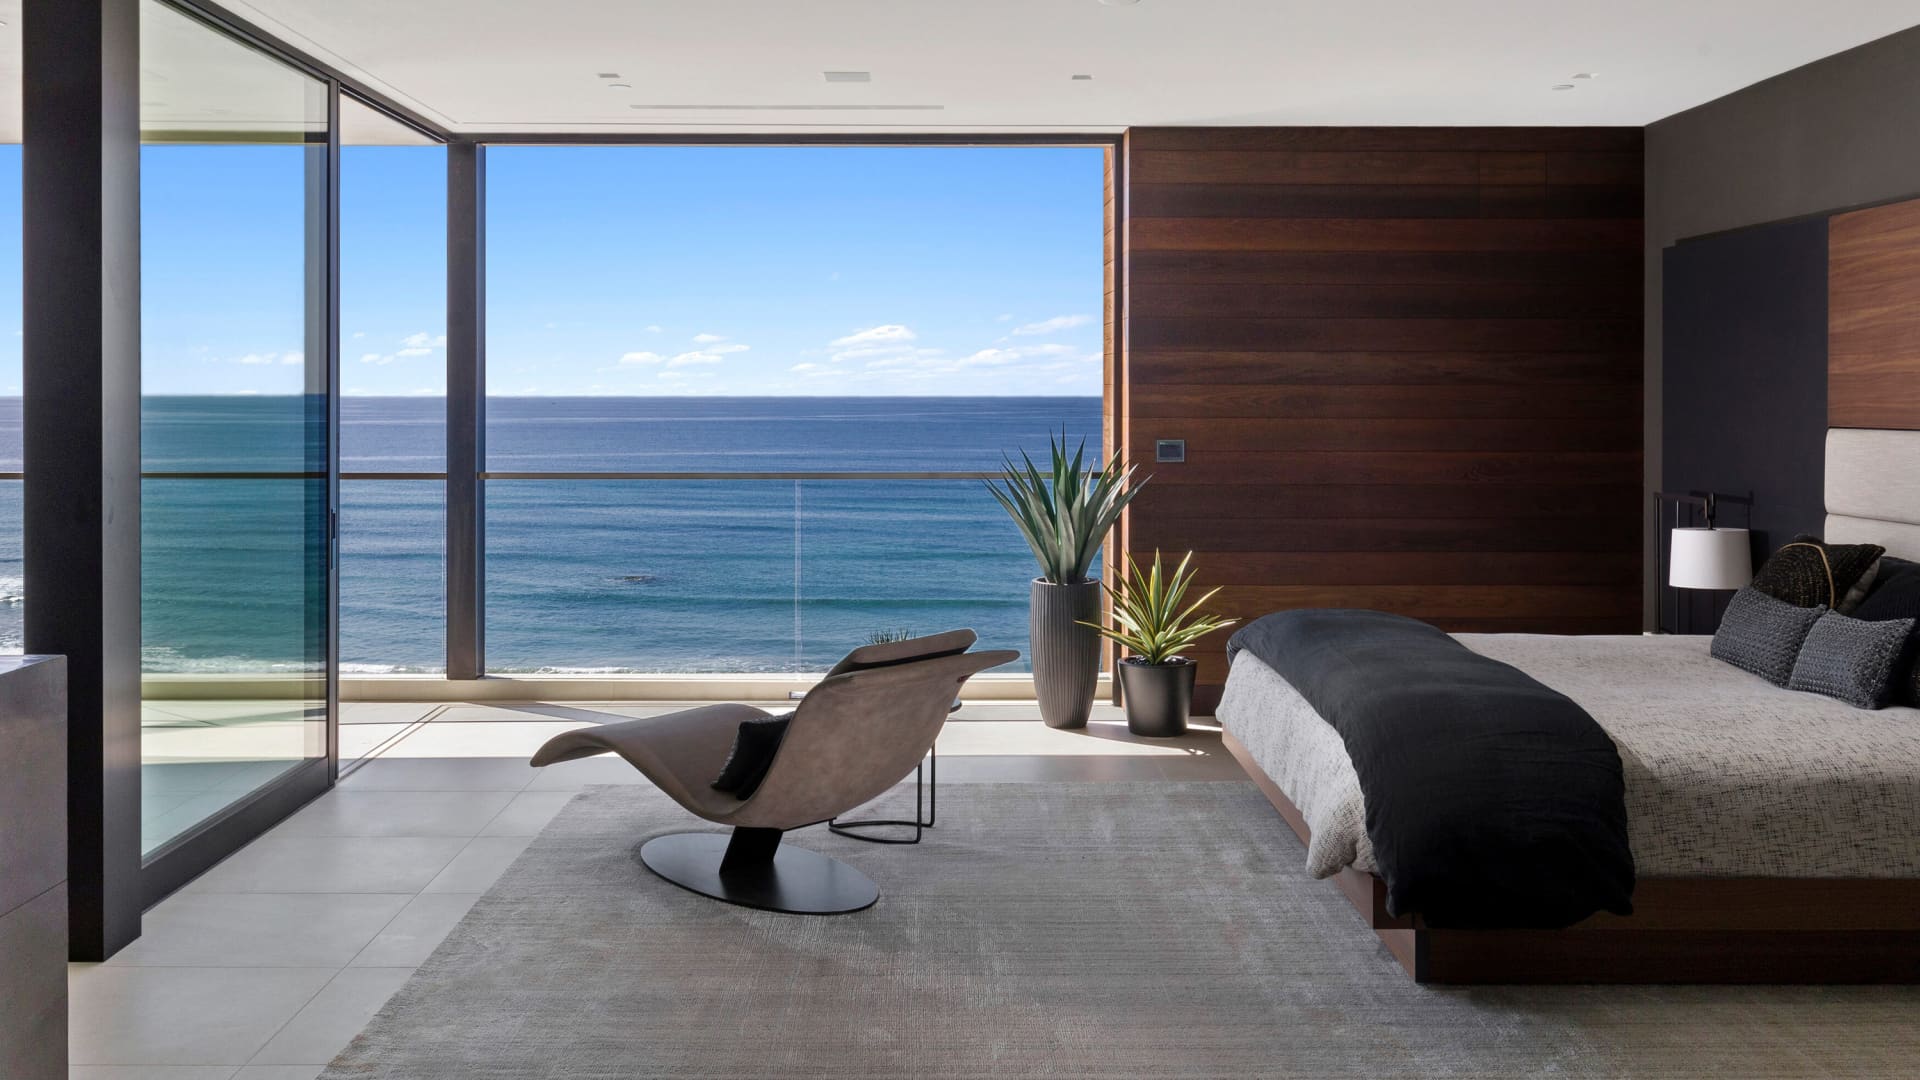 One of Ora House's five bedrooms with an ocean view.